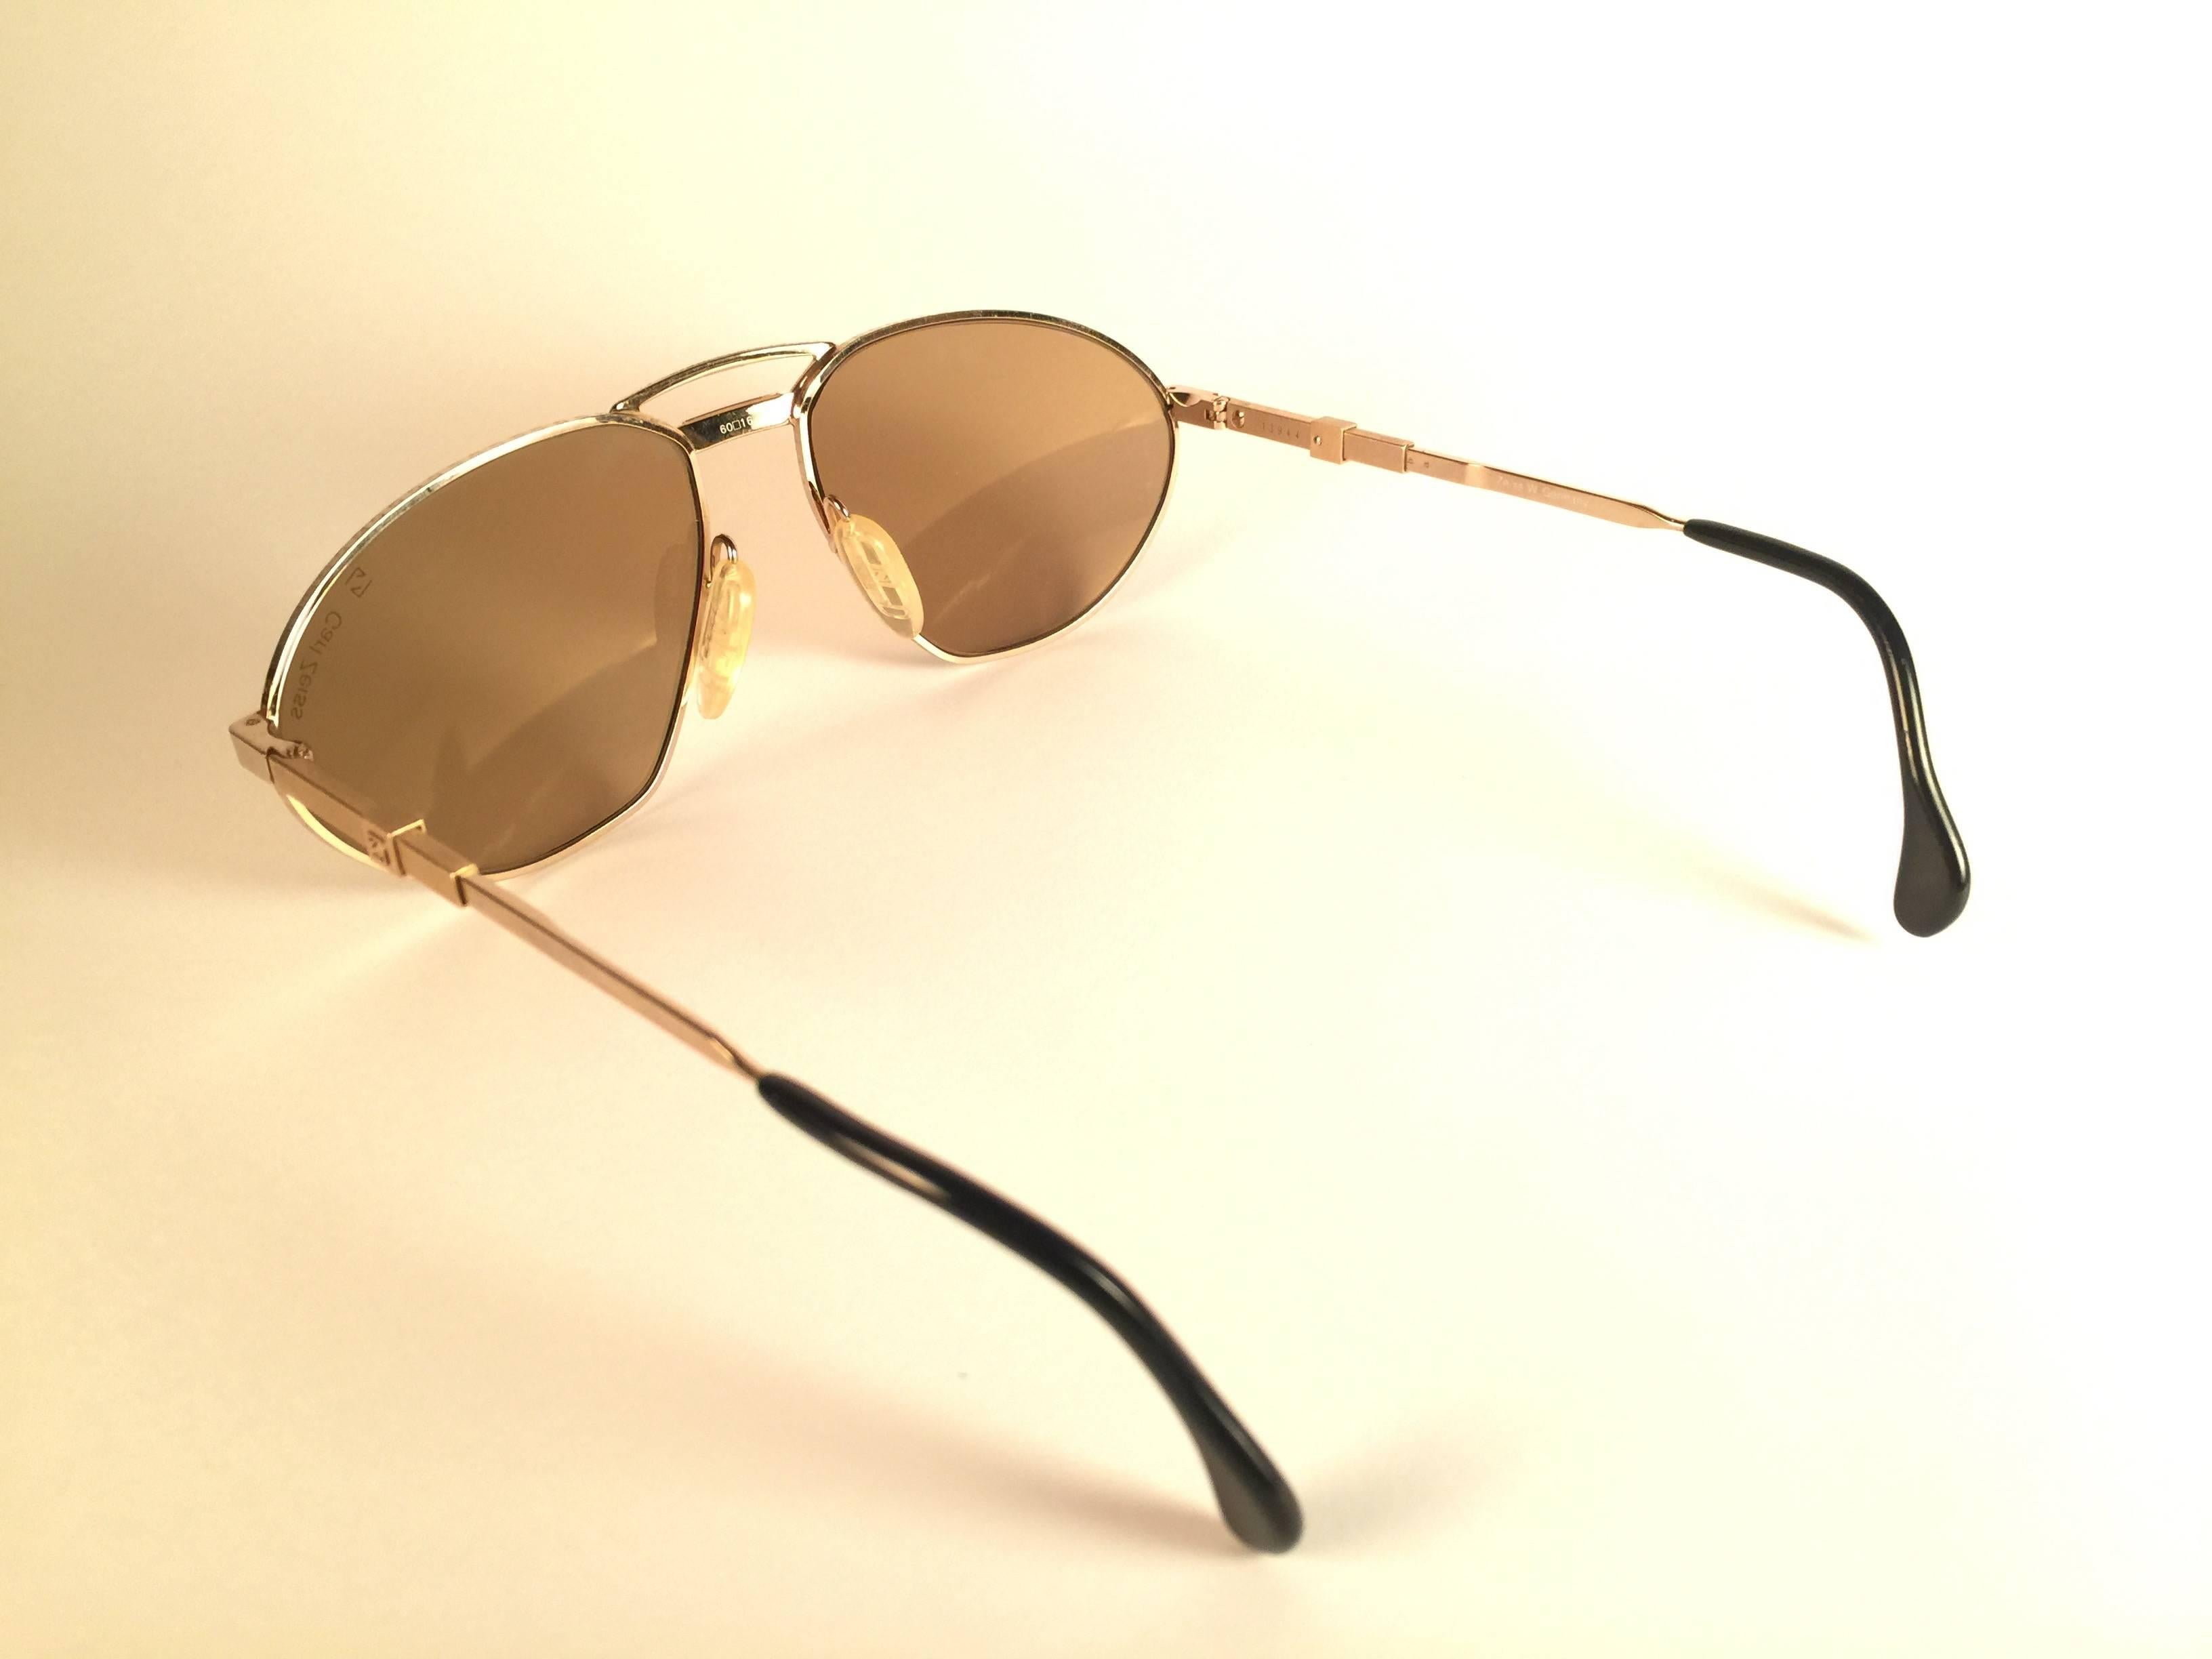 New Vintage Zeiss Competition Tortoise & Gold Brown Lenses 1980's Sunglasses 1